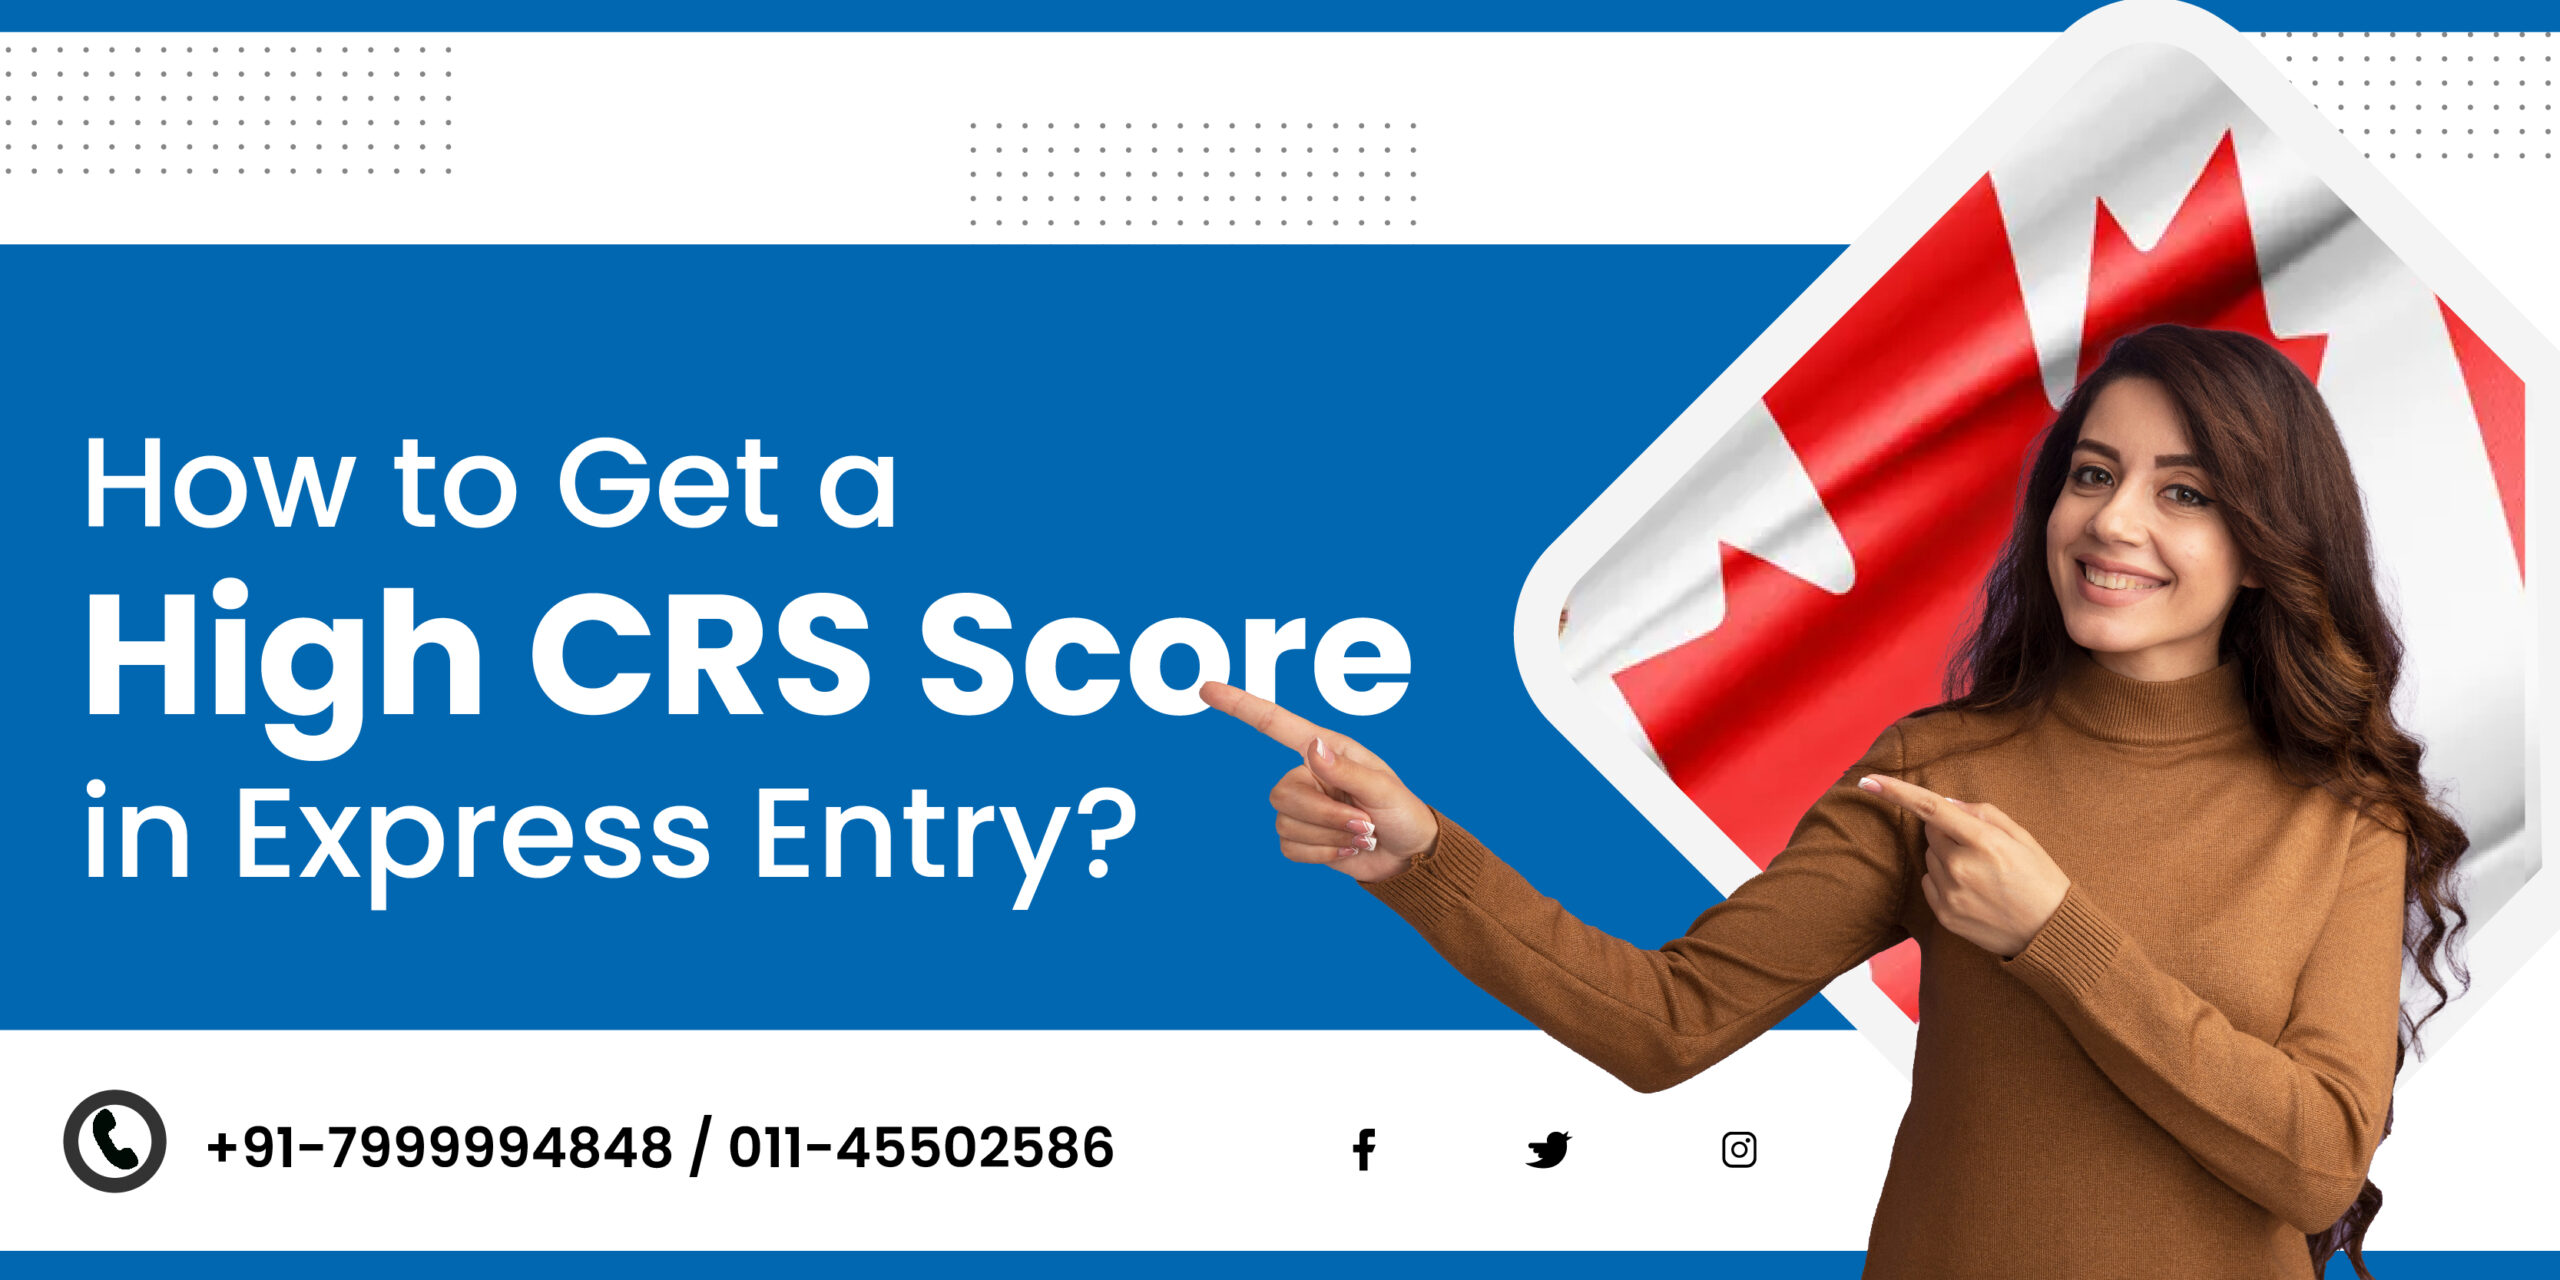 How to Get a High CRS Score in Express Entry?